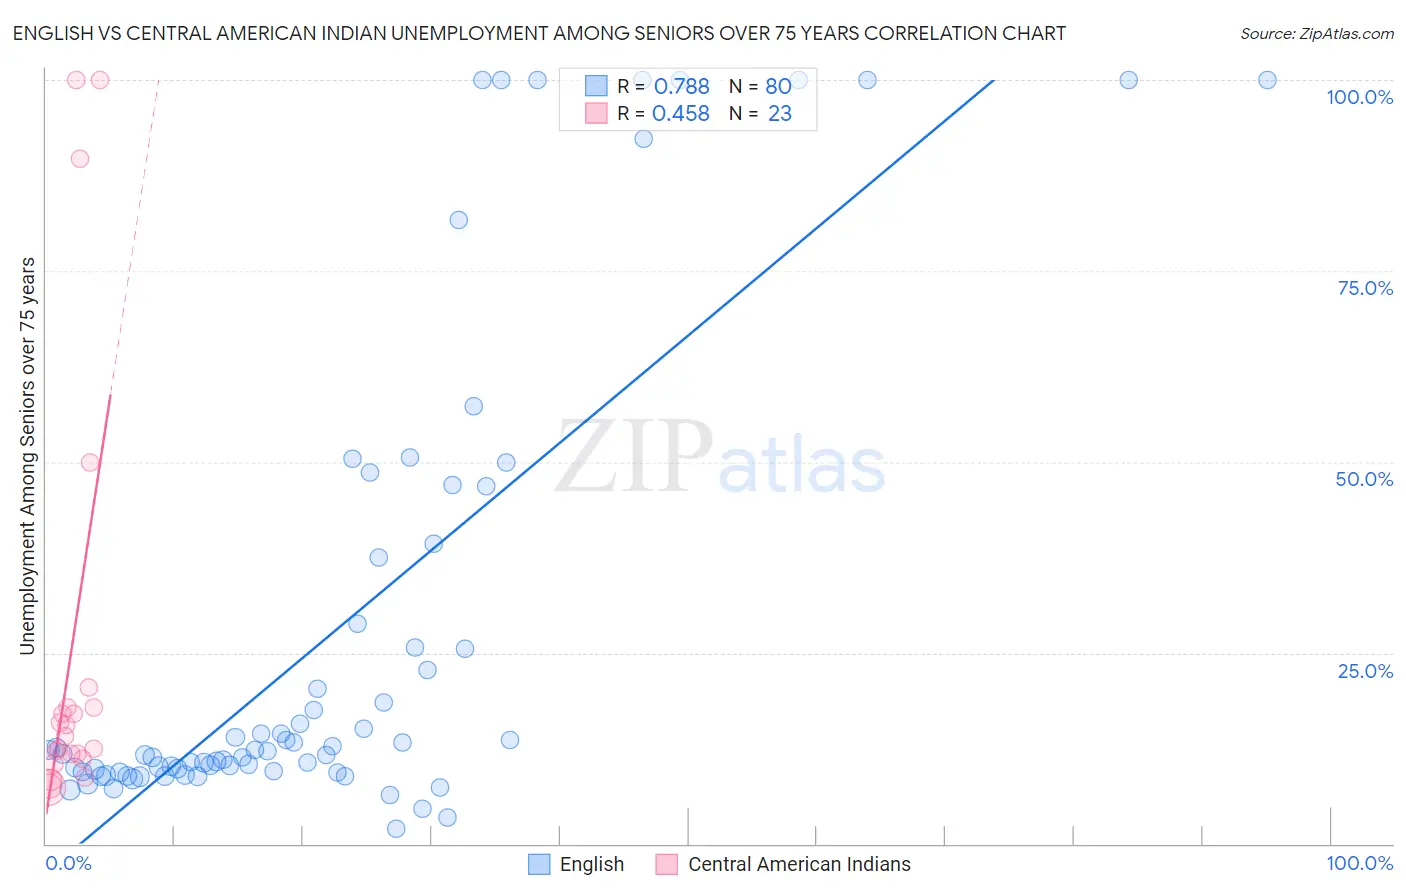 English vs Central American Indian Unemployment Among Seniors over 75 years